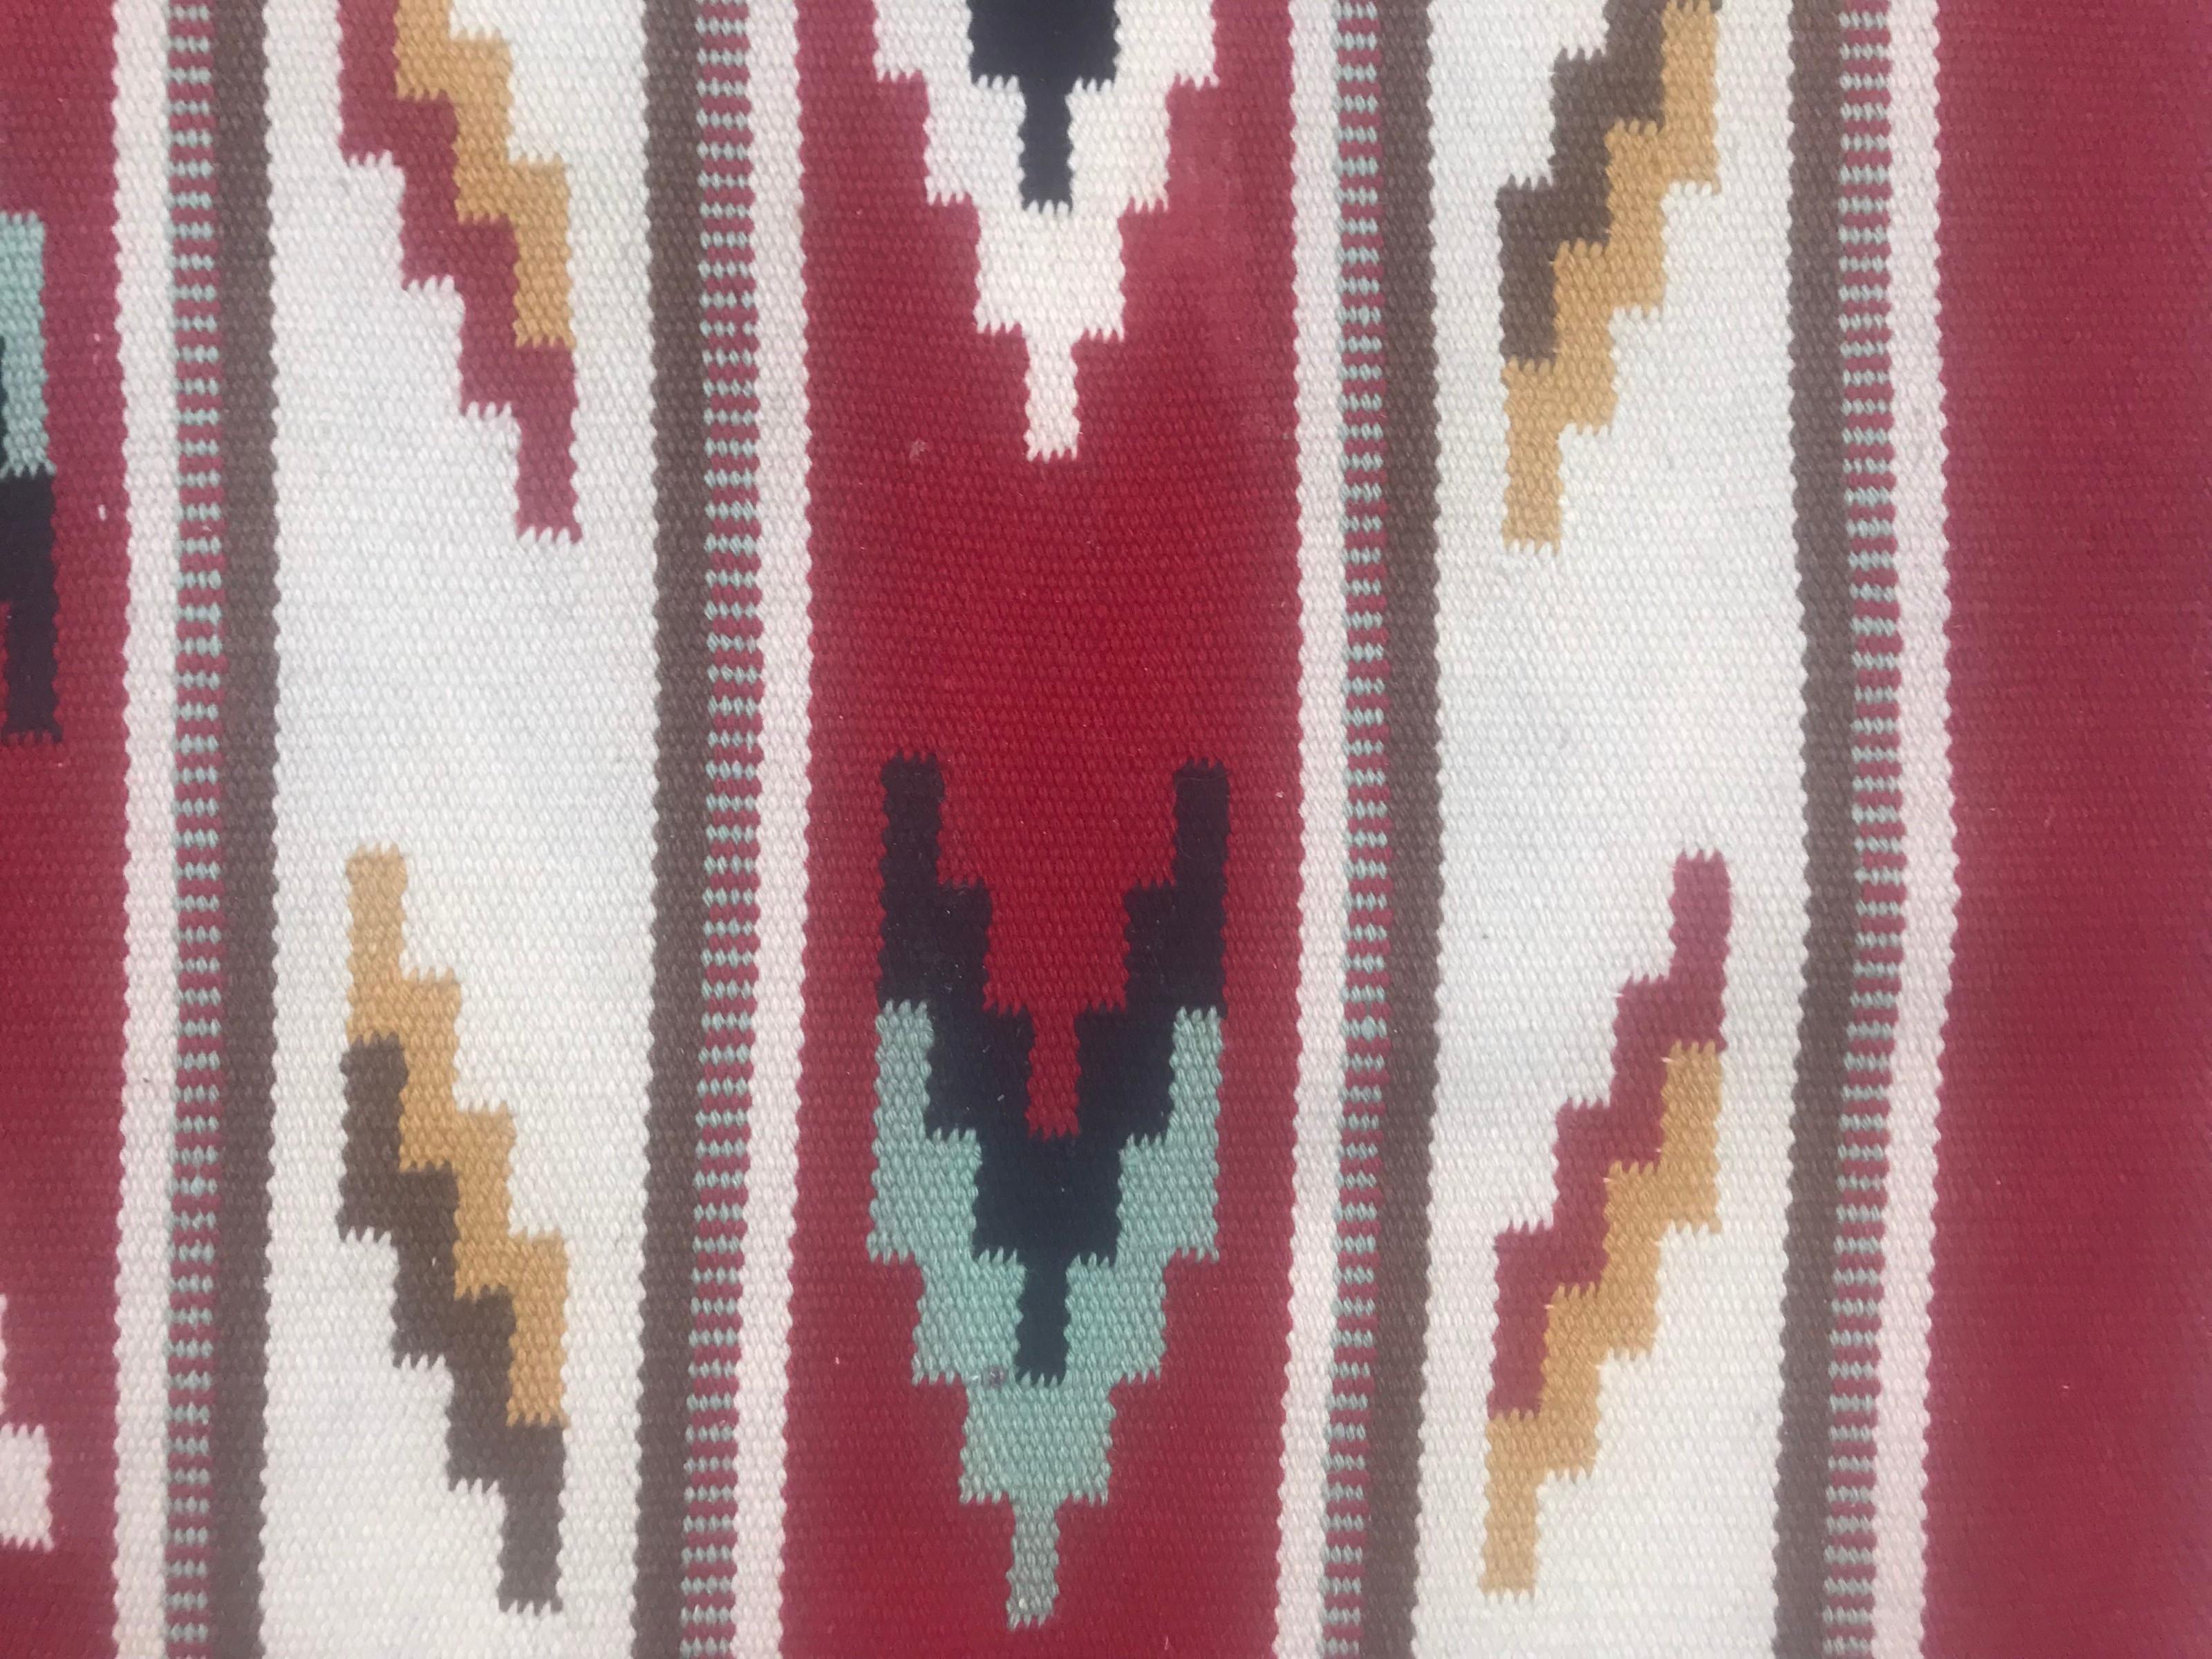 Stunning 20th-century flat-woven Scandinavian rug featuring a captivating geometrical design and vibrant colors including red, blue, orange, grey, and black. Meticulously handwoven with wool on a cotton foundation. A timeless piece that adds beauty